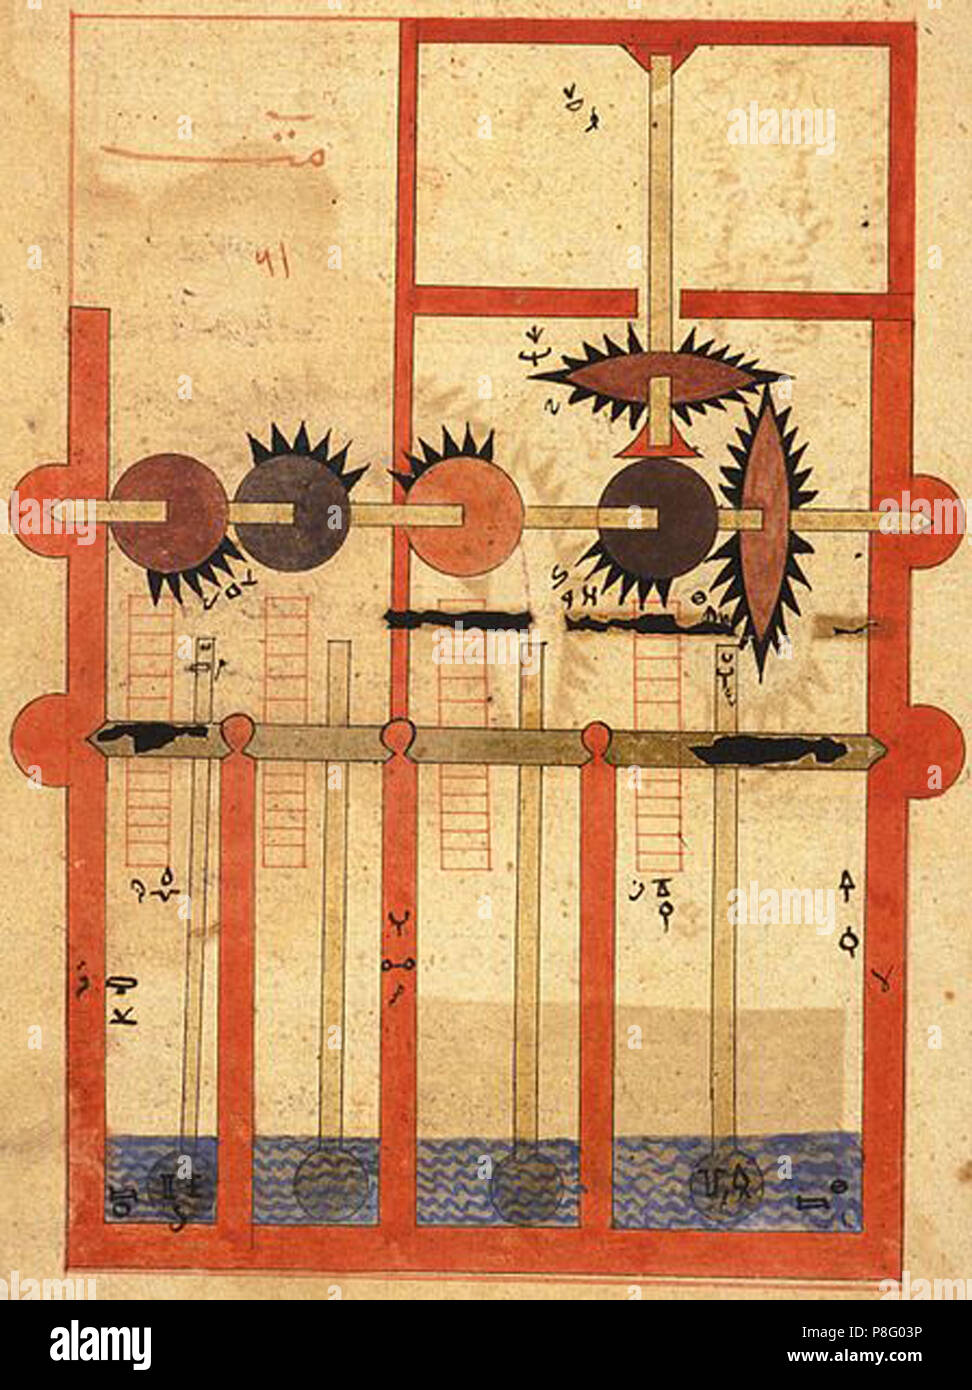 arabic machine drawings ancient on papyrus Stock Photo